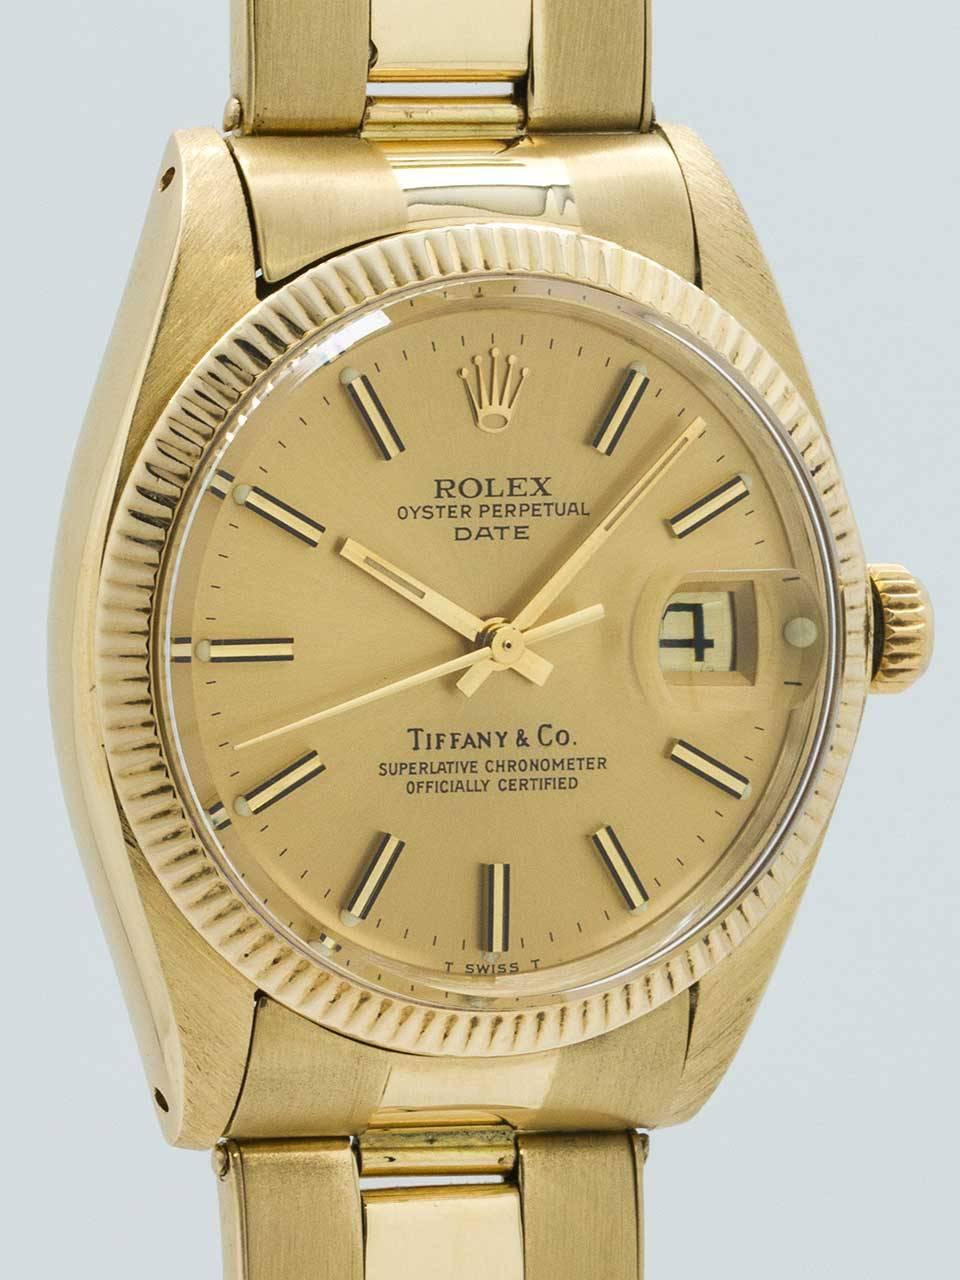 Rolex 14K Yellow Gold Oyster Perpetual Date ref 1500 circa 1979 retailed by Tiffany & Co. Classic vintage man’s model, also ideal oversize for a woman. 34mm diameter case with fluted bezel and acrylic crystal. With original mint condition champagne